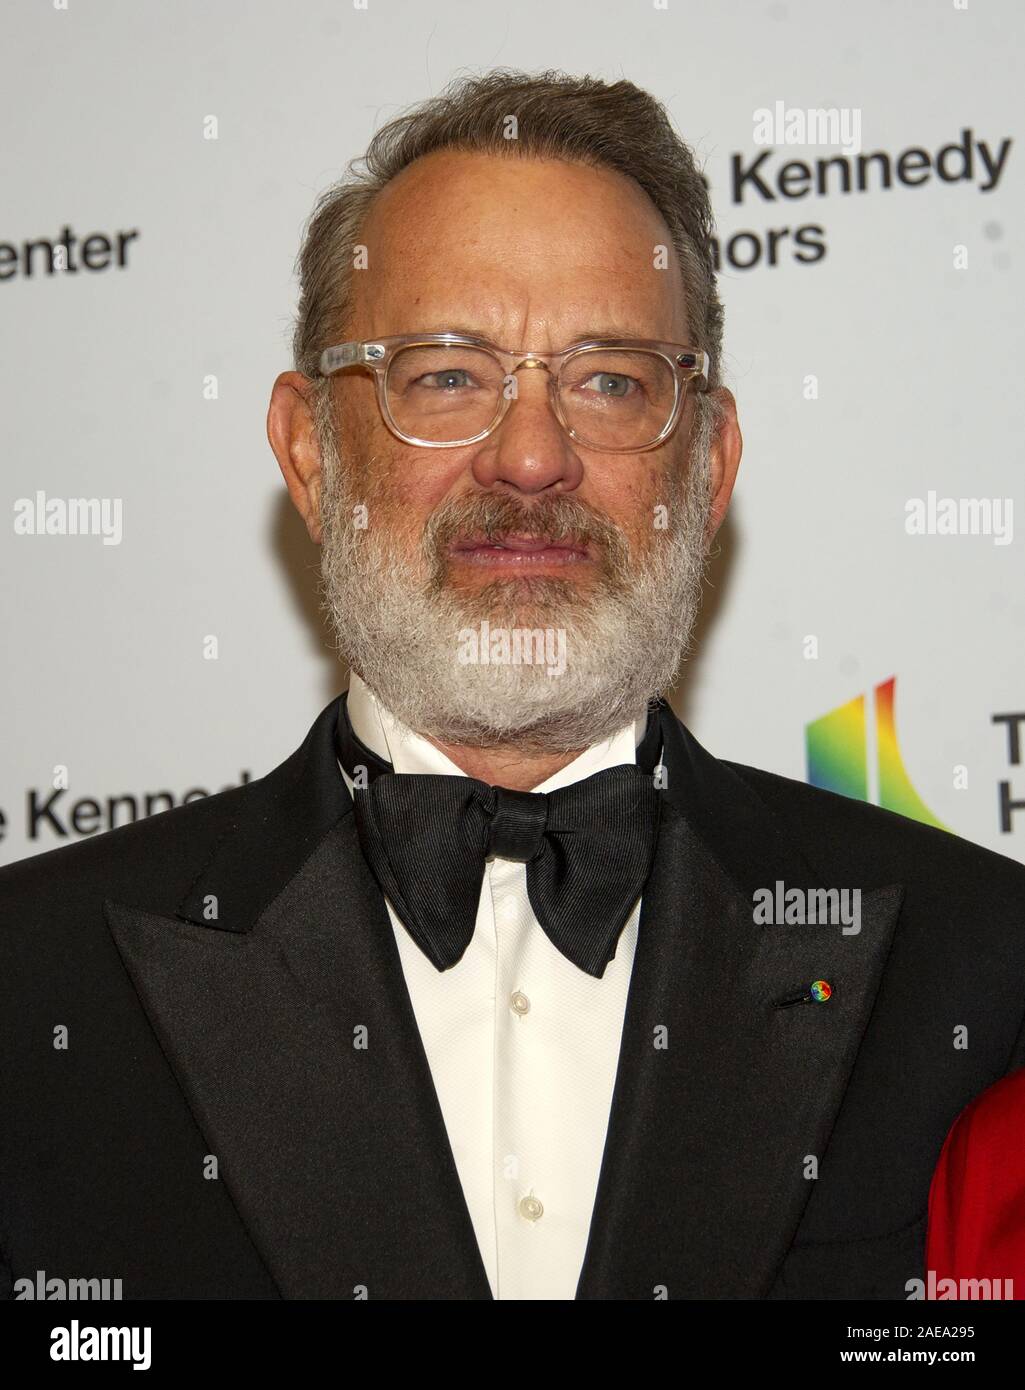 Washington DC, USA. 7th Dec, 2019. Tom Hanks arrives for the formal Artist's Dinner honoring the recipients of the 42nd Annual Kennedy Center Honors at the United States Department of State in Washington, DC on Saturday, December 7, 2019. The 2019 honorees are: Earth, Wind & Fire, Sally Field, Linda Ronstadt, Sesame Street, and Michael Tilson Thomas Credit: Ron Sachs/CNP/ZUMA Wire/Alamy Live News Stock Photo